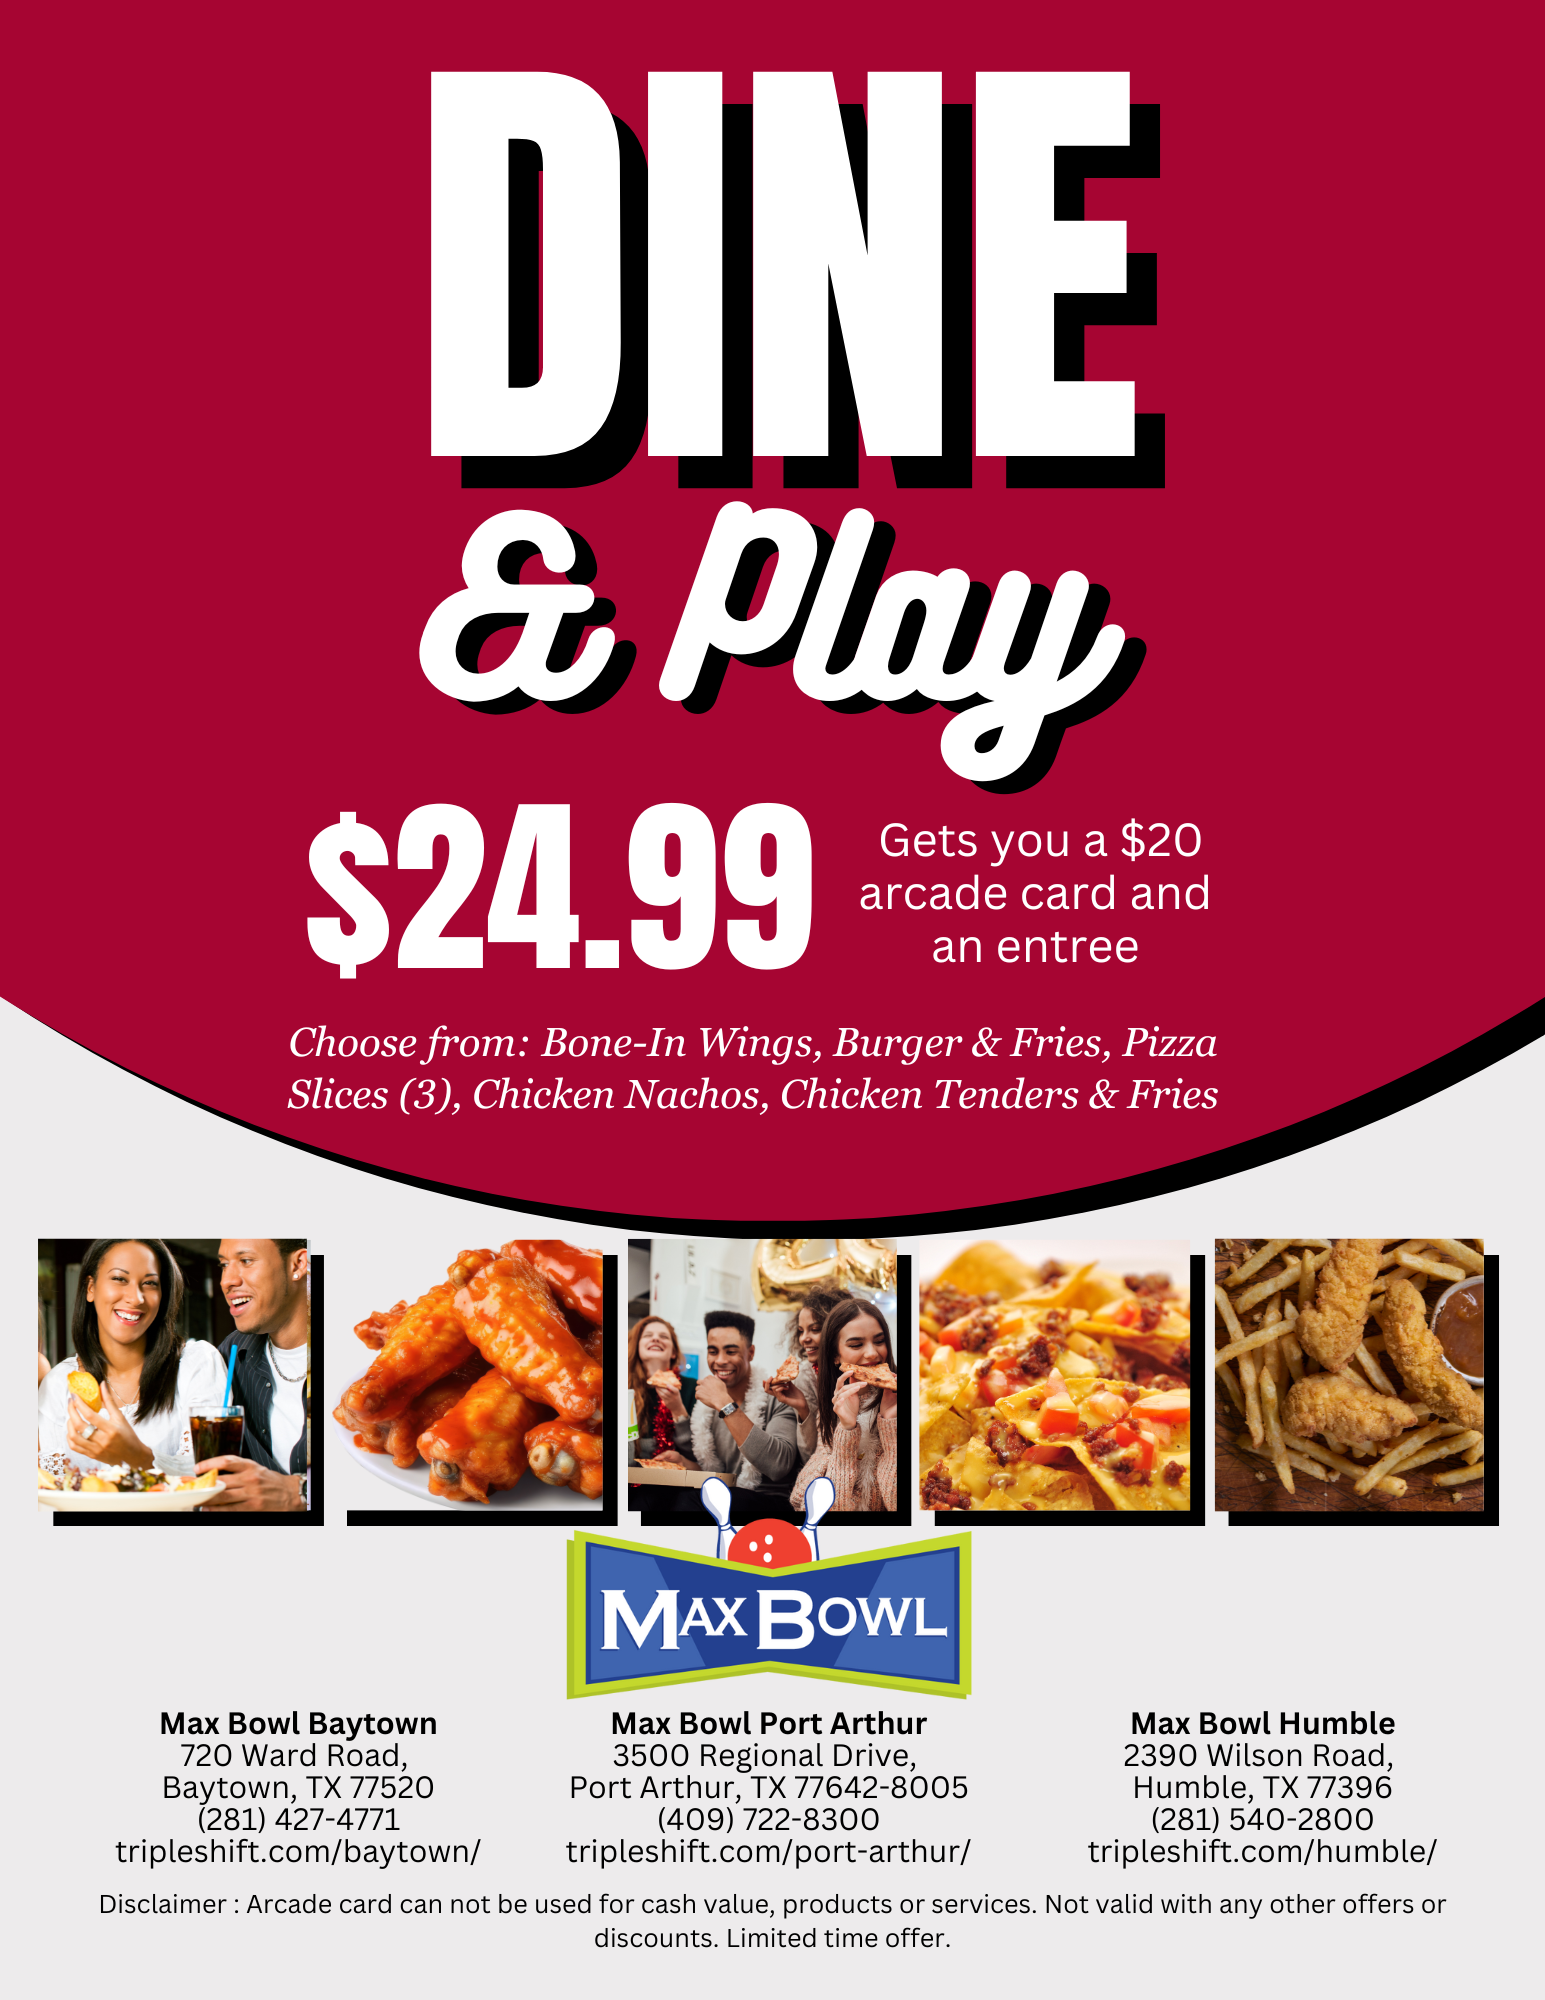 Craving fun & food? Dine & Play has you covered! Get an entree + $20 arcade card for just $24.99! Eat, play, repeat! Dine and Play Marketing Promotion.